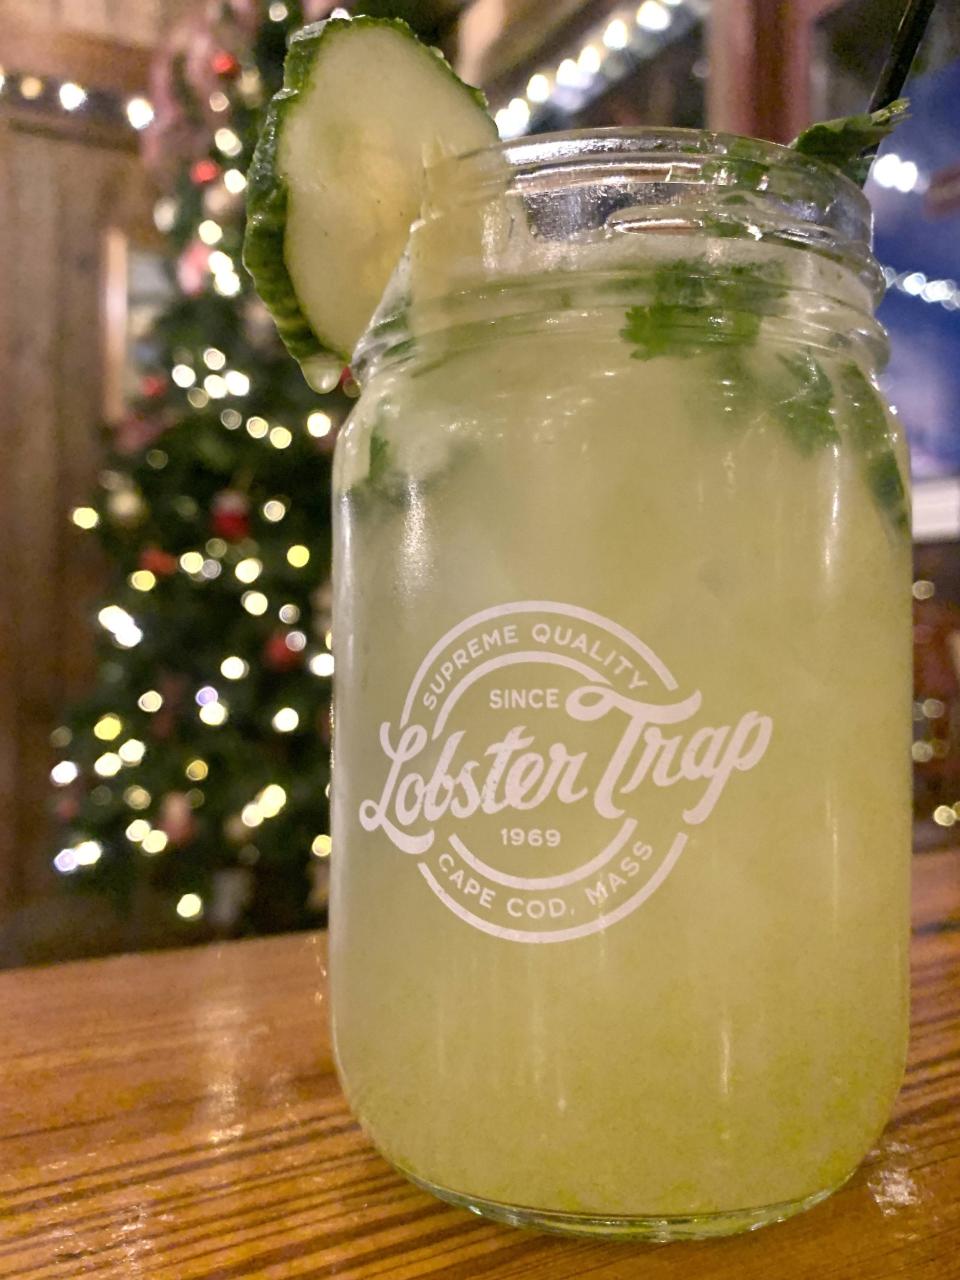 The Cucumber Cilantro Margarita, made with Ghost Tequila, is popular at Lobster Trap Restaurant in Bourne. Cape Cod bartenders share tips on creating a signature cocktail for your New Year's party or use the recipe for this spicy drink, that is shaken not stirred.